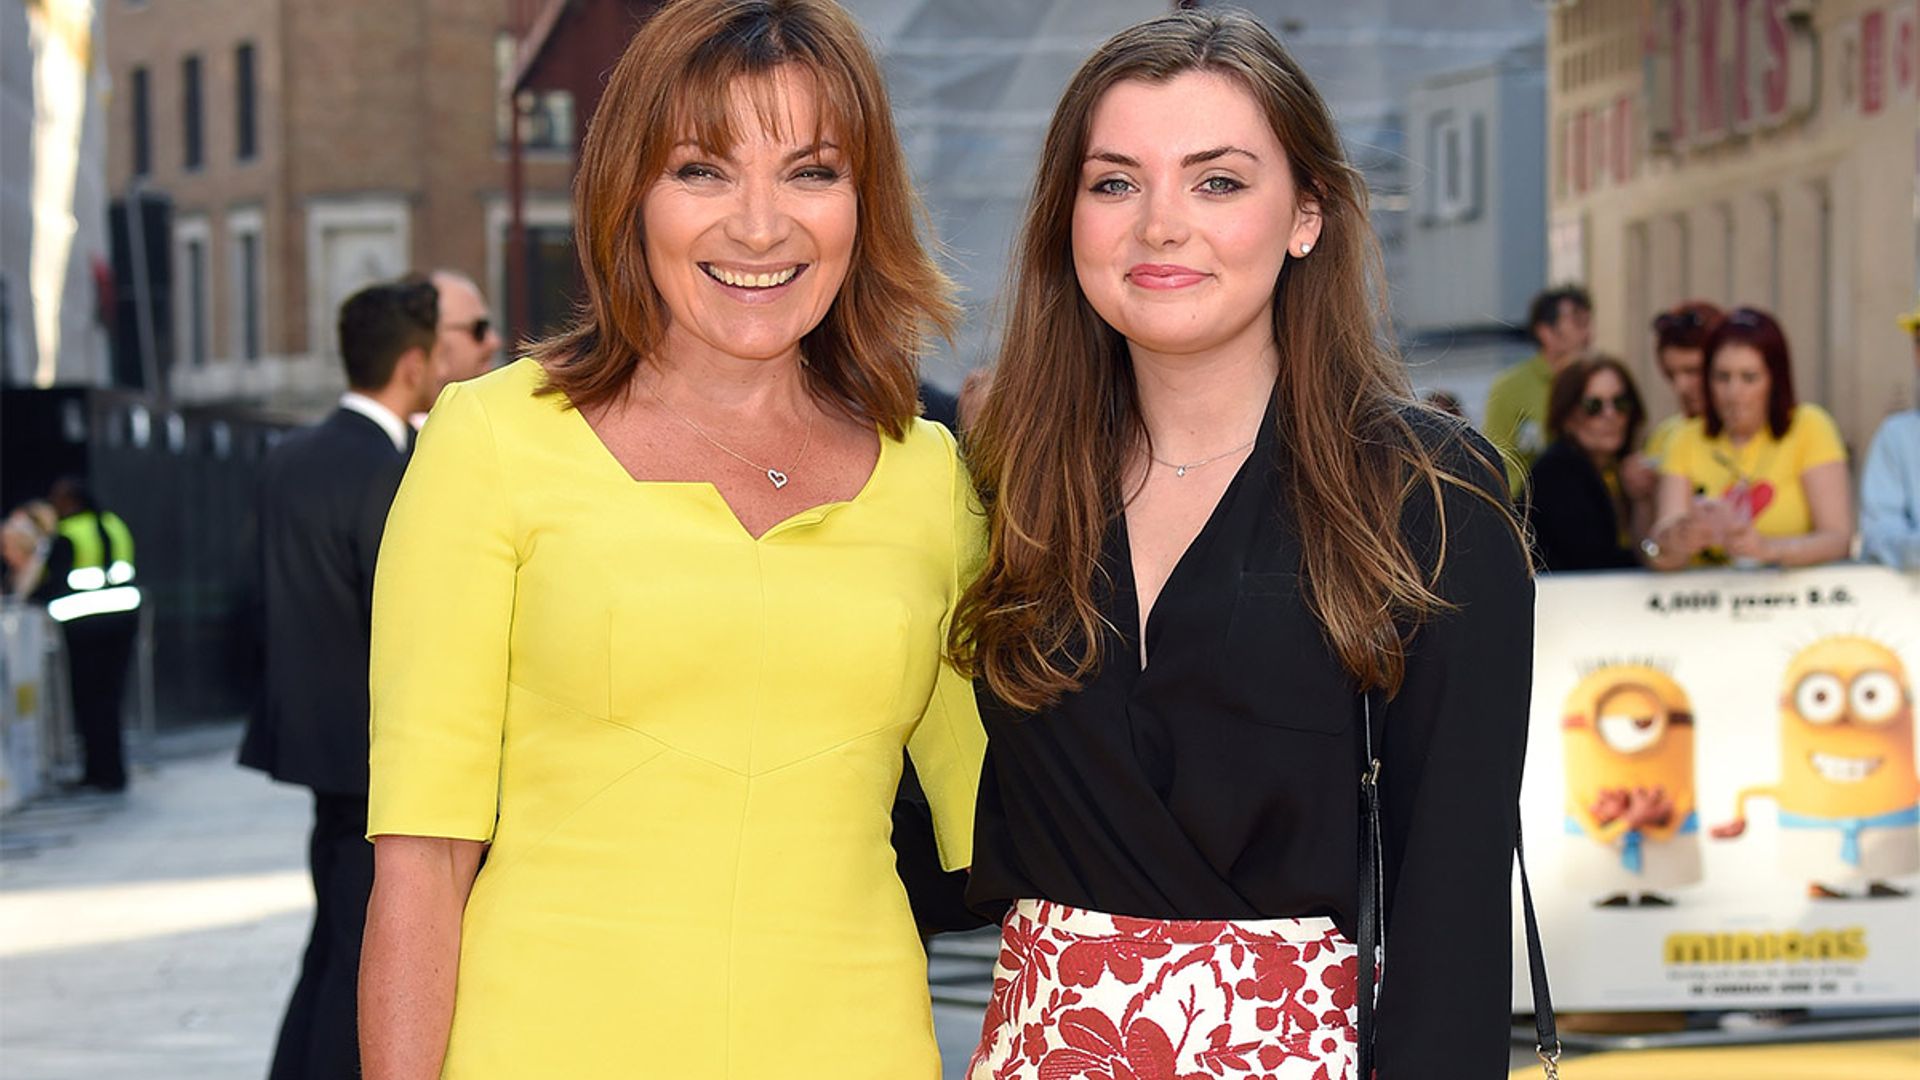 lorraine and daughter rosie at launch